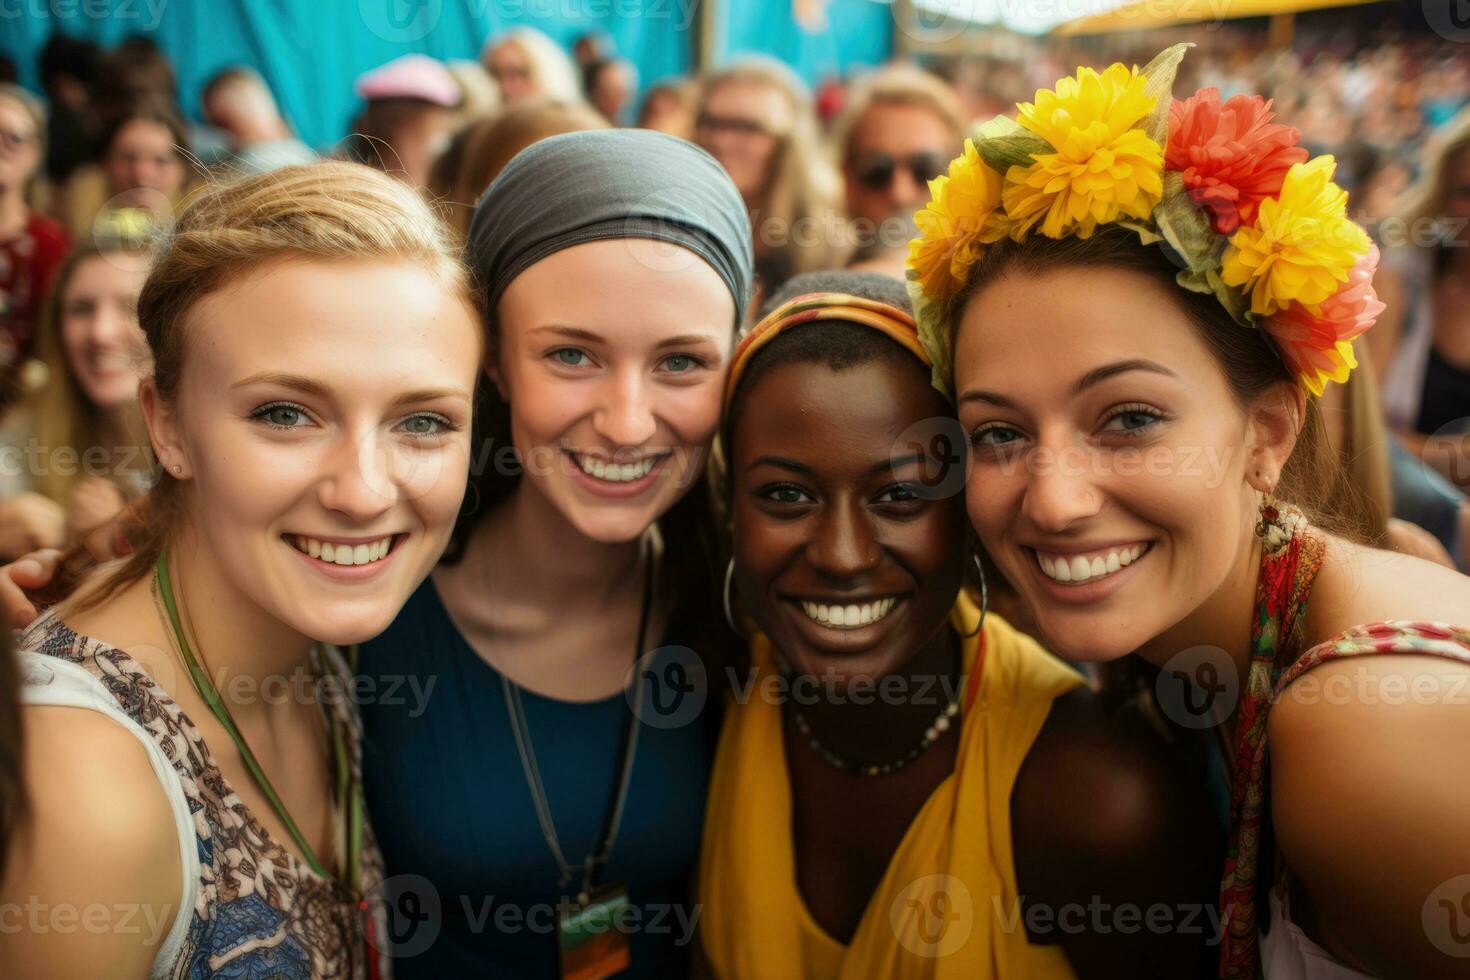 Diverse group selfies at cultural festivals imbued with chic plum toned vibrancy photo